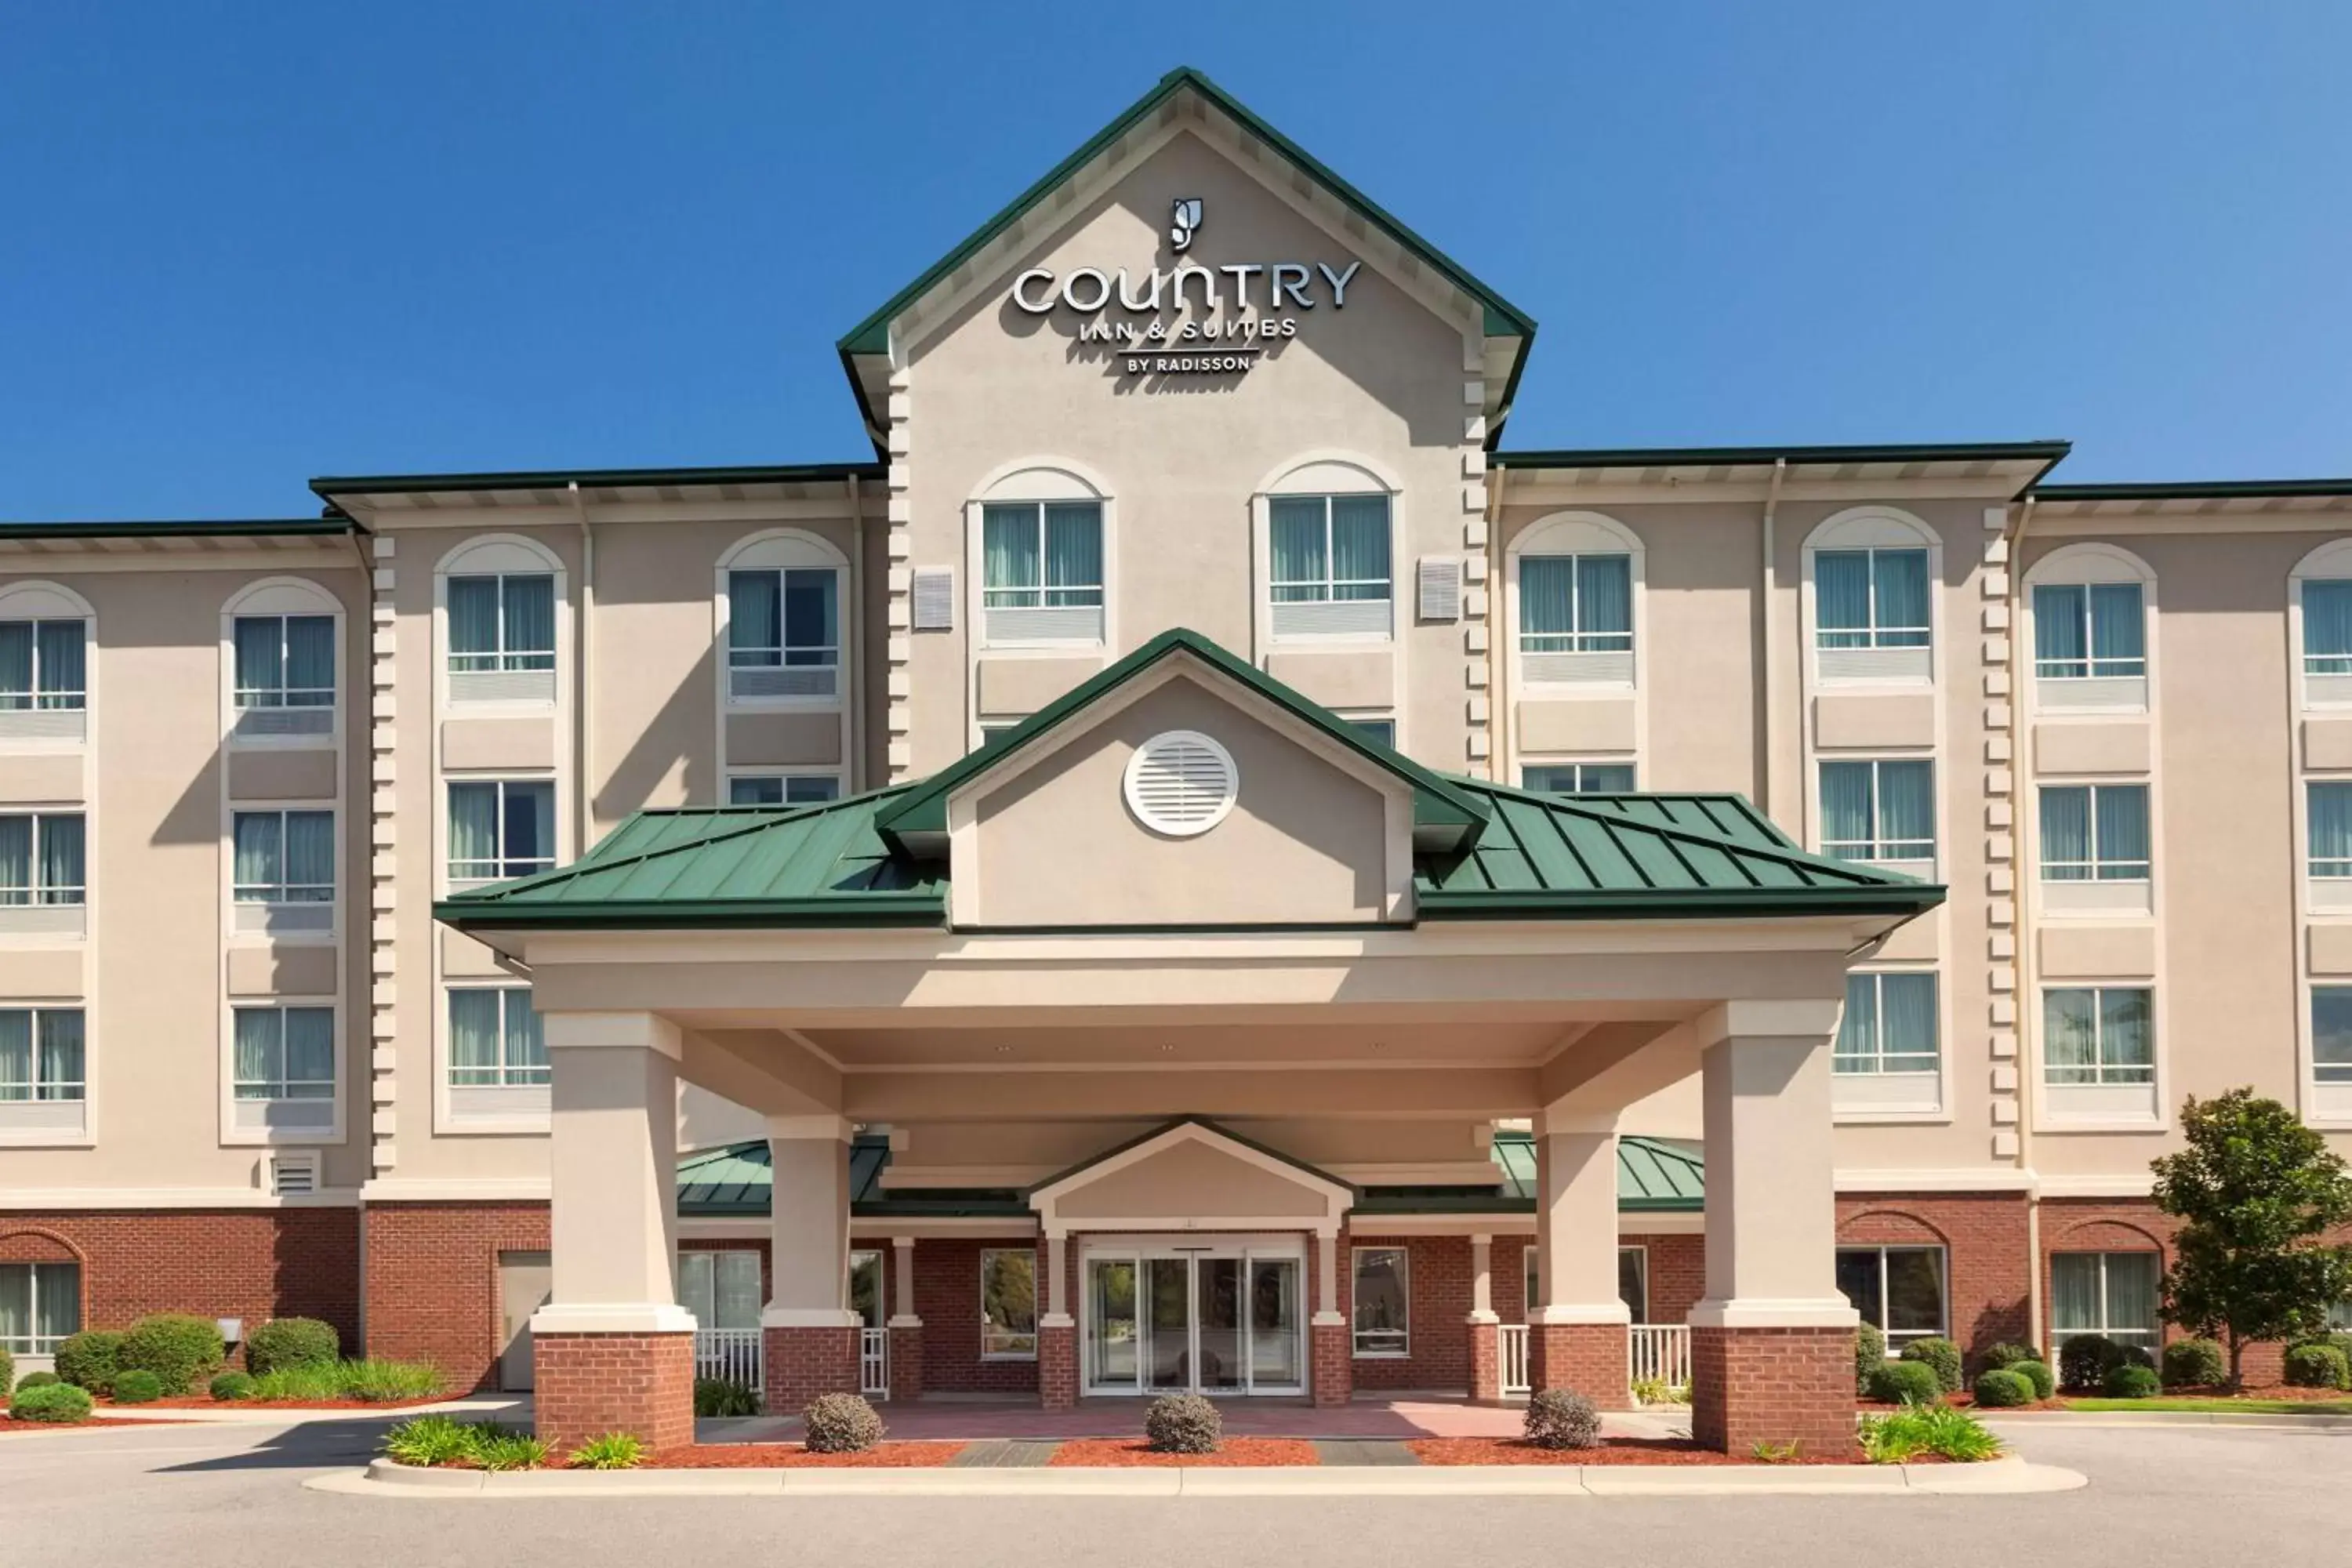 Property Building in Country Inn & Suites by Radisson, Tifton, GA